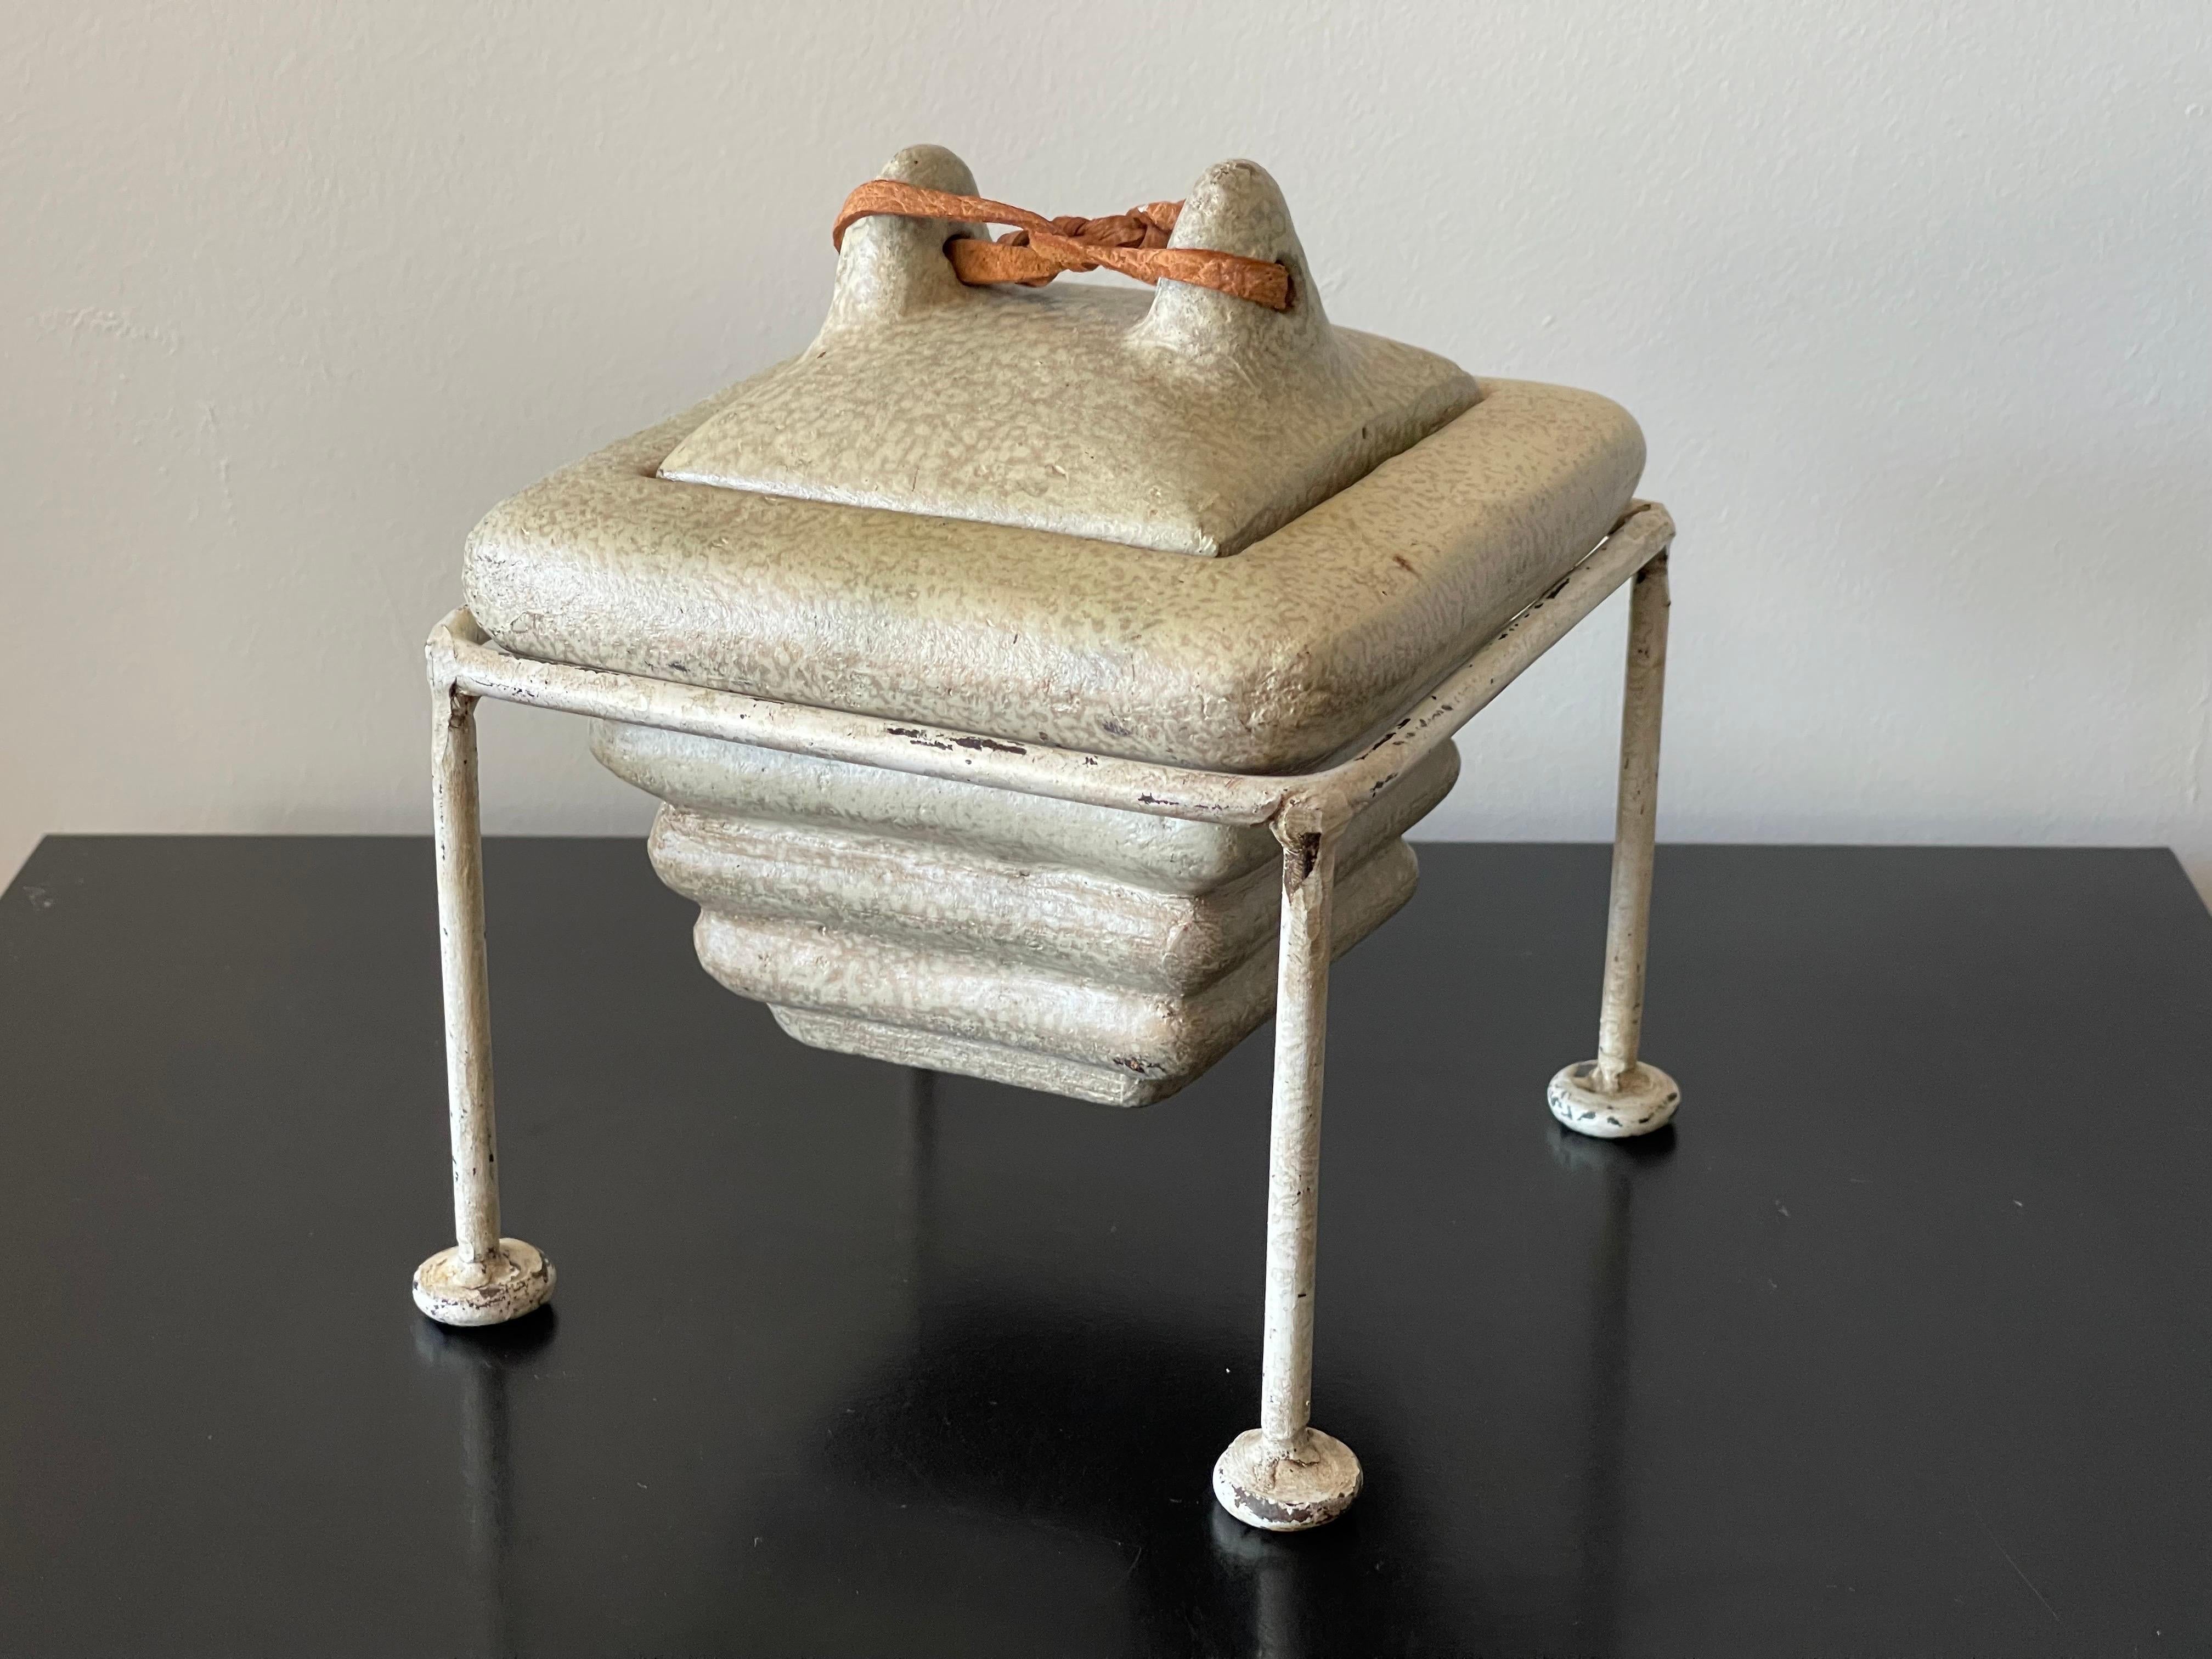 American Mid-Century Modern Trinket Jewelry Box Ceramic with Leather Pull and Iron Stand For Sale